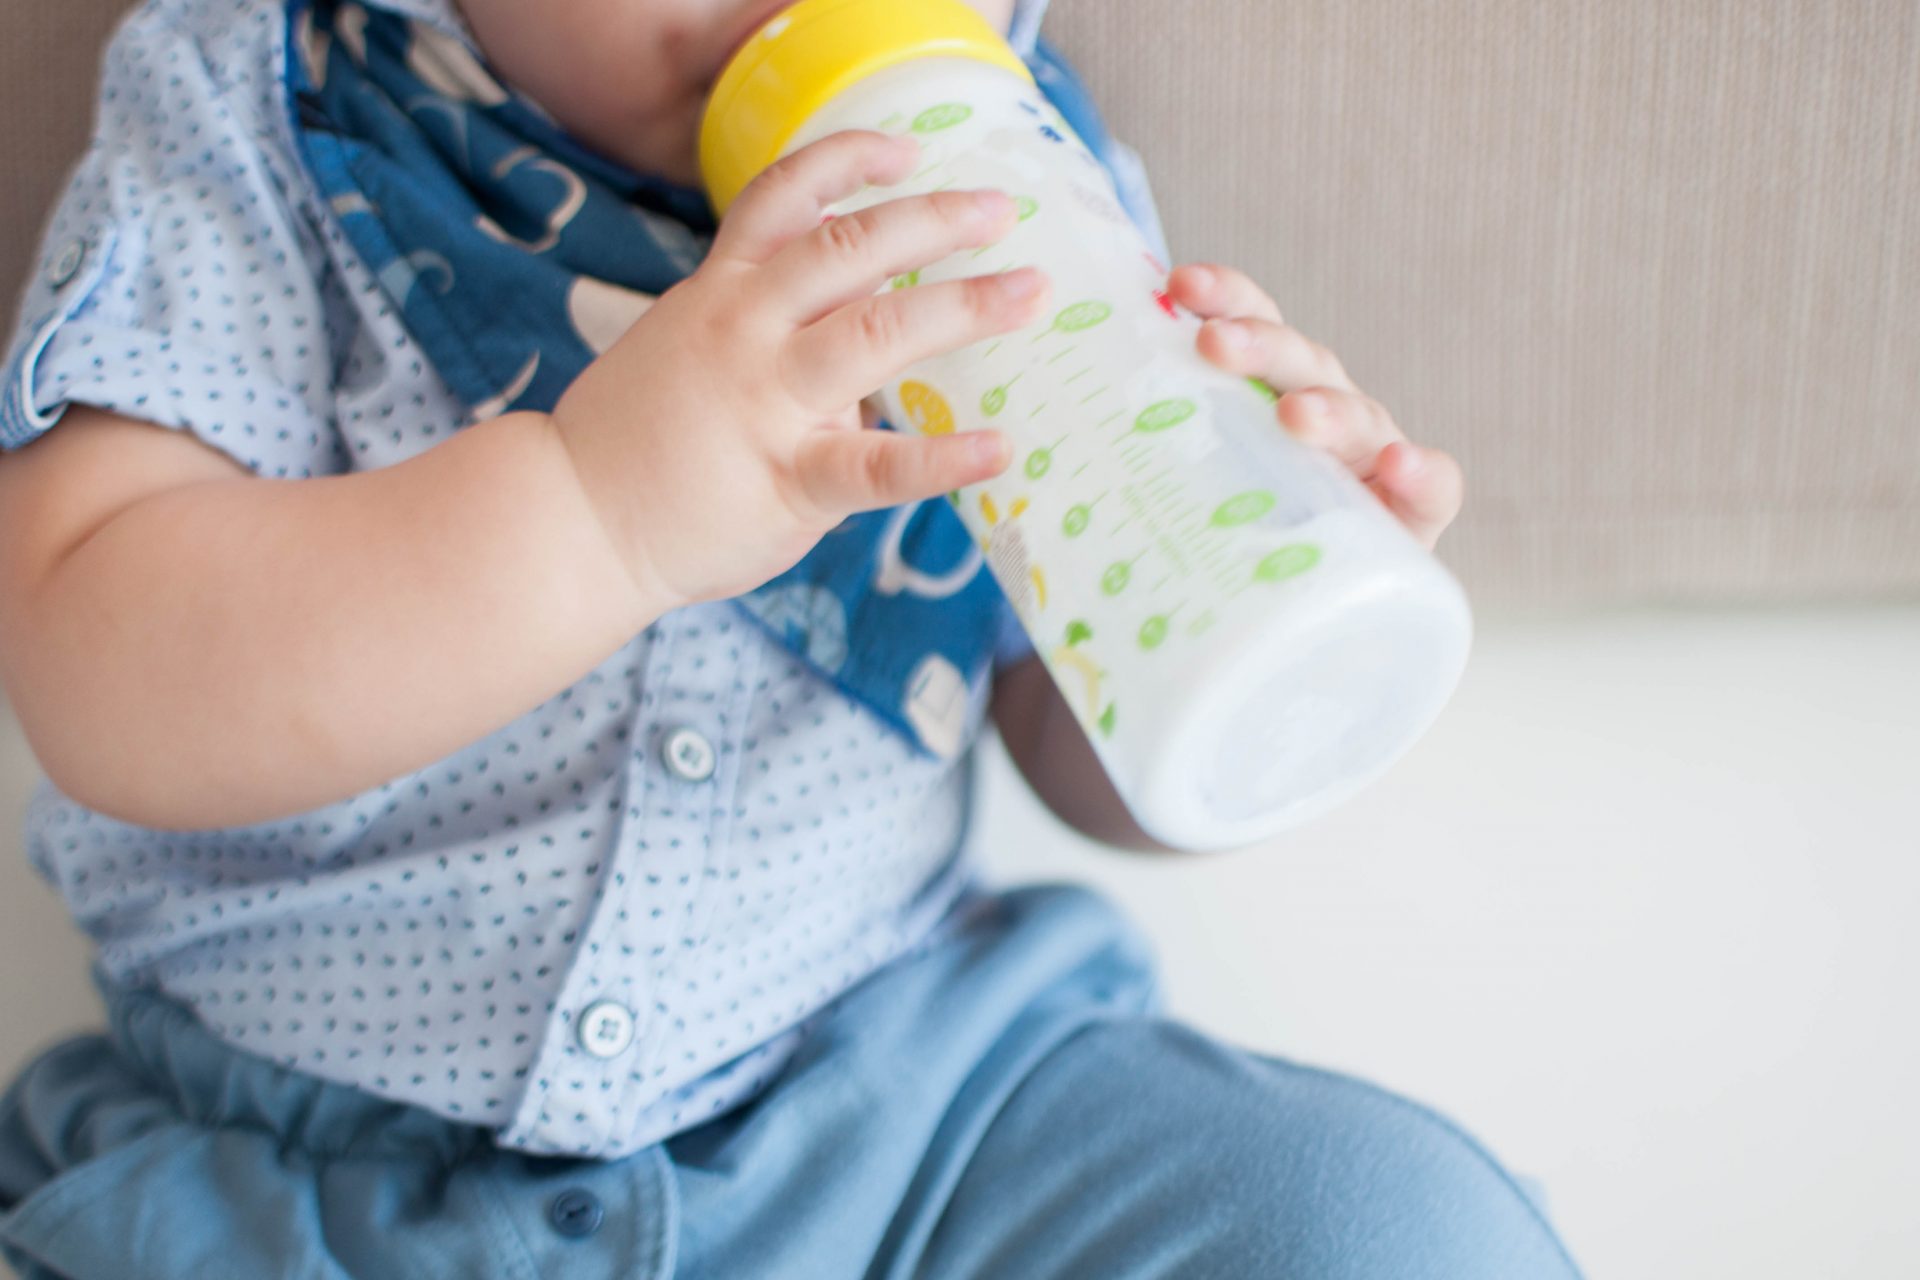 BPA used to be the go-to for baby bottles